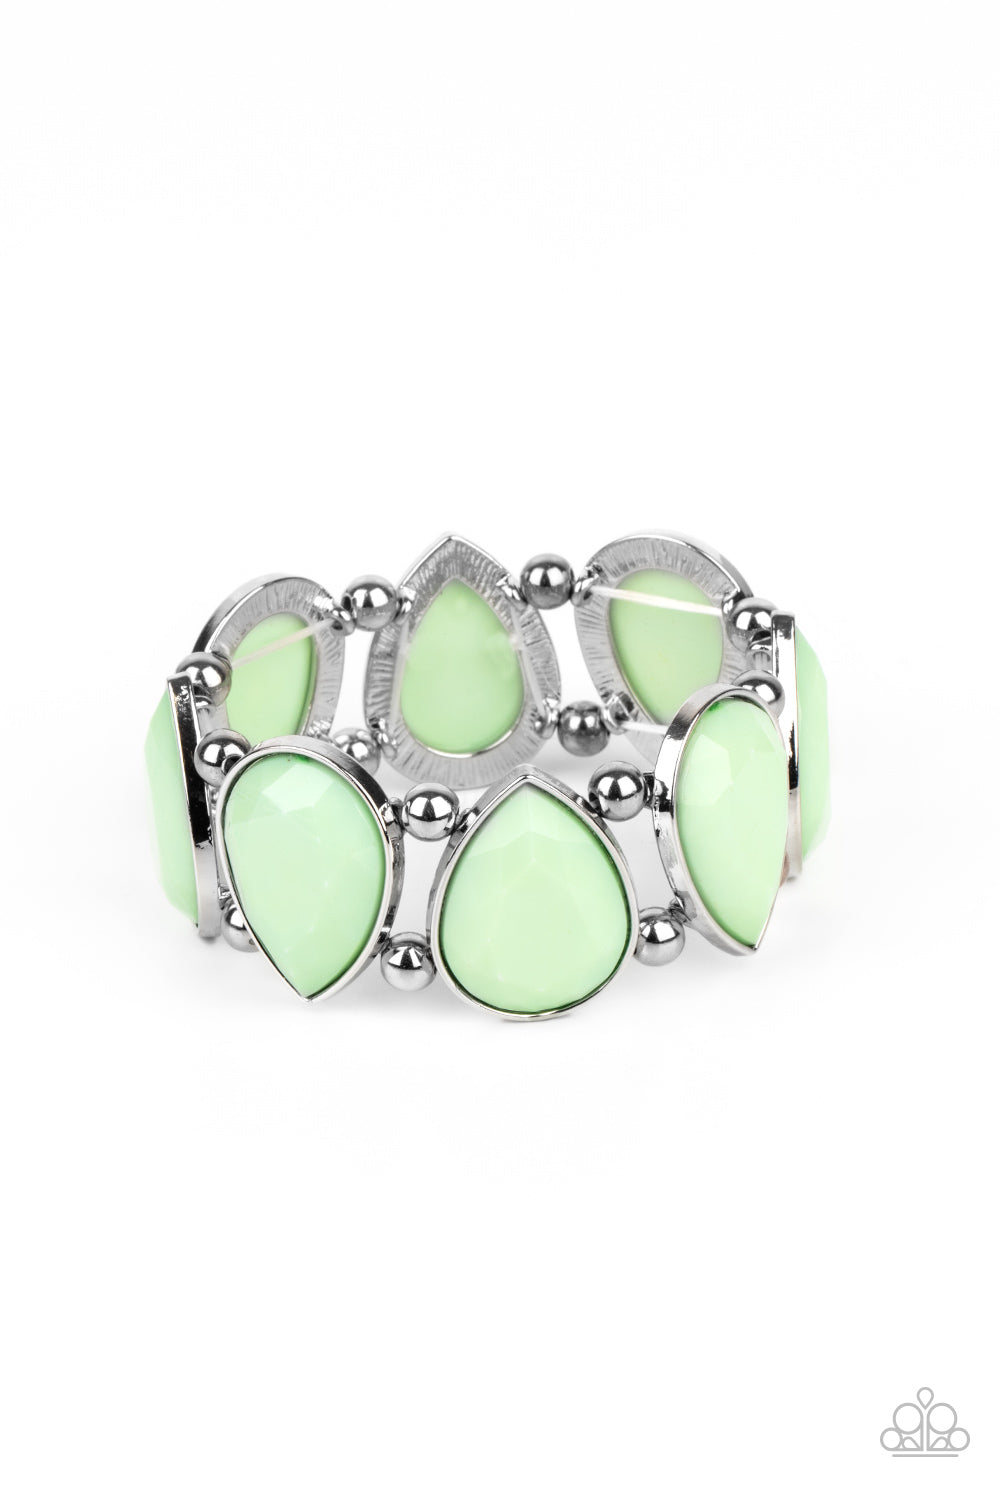 Flamboyant Tease - Green and Silver - Stretchy Bracelet - Paparazzi Accessories - 
Separated by pairs of classic silver beads, faceted Green Ash teardrop frames alternate right side up and upside down along a stretchy band around the wrist for a flirty pop of color. Sold as one individual bracelet.
